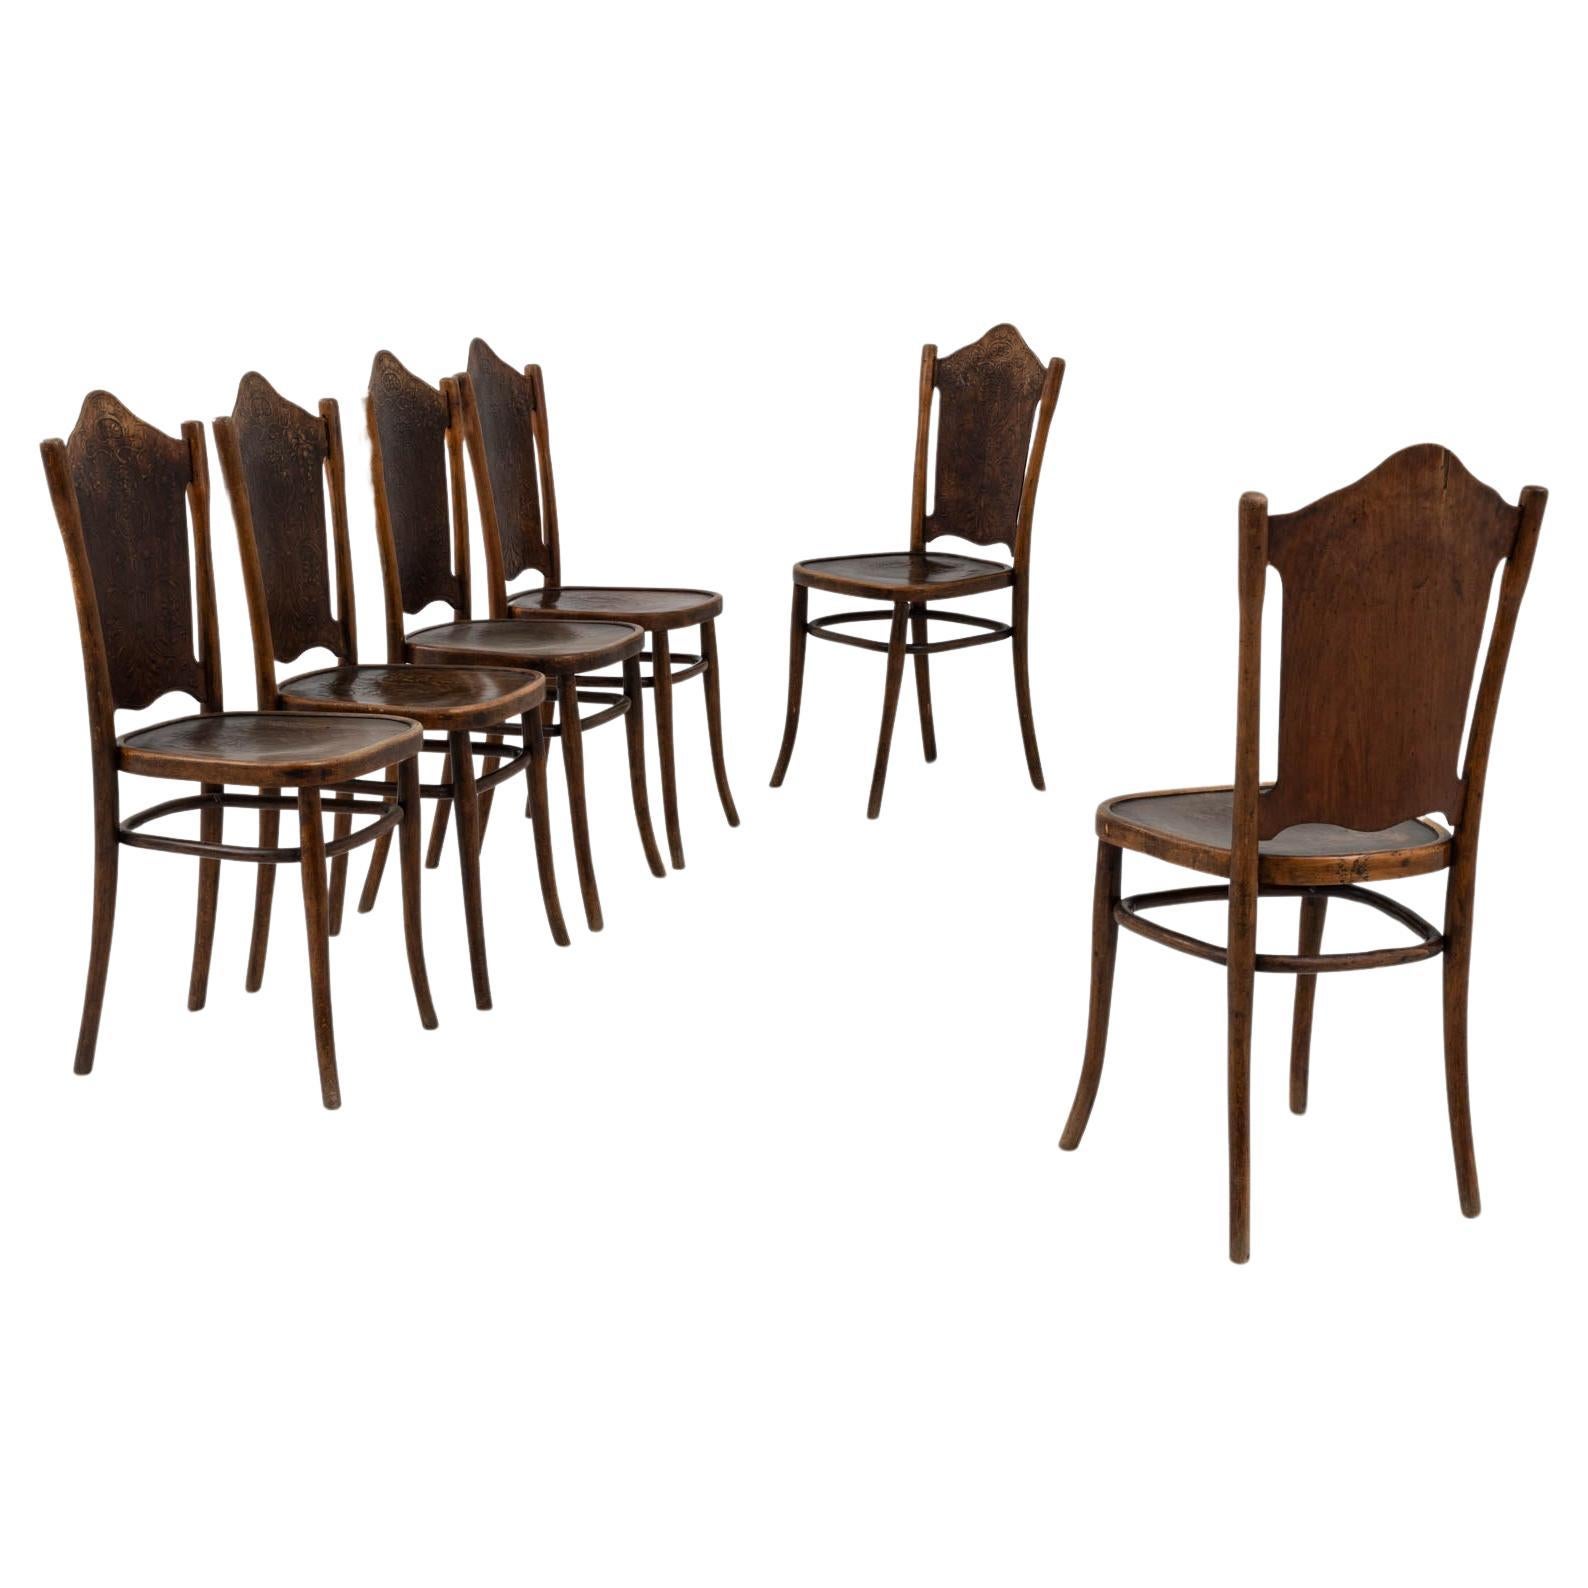 1910s Austrian Wooden Dining Chairs By Thonet, Set of 6 For Sale